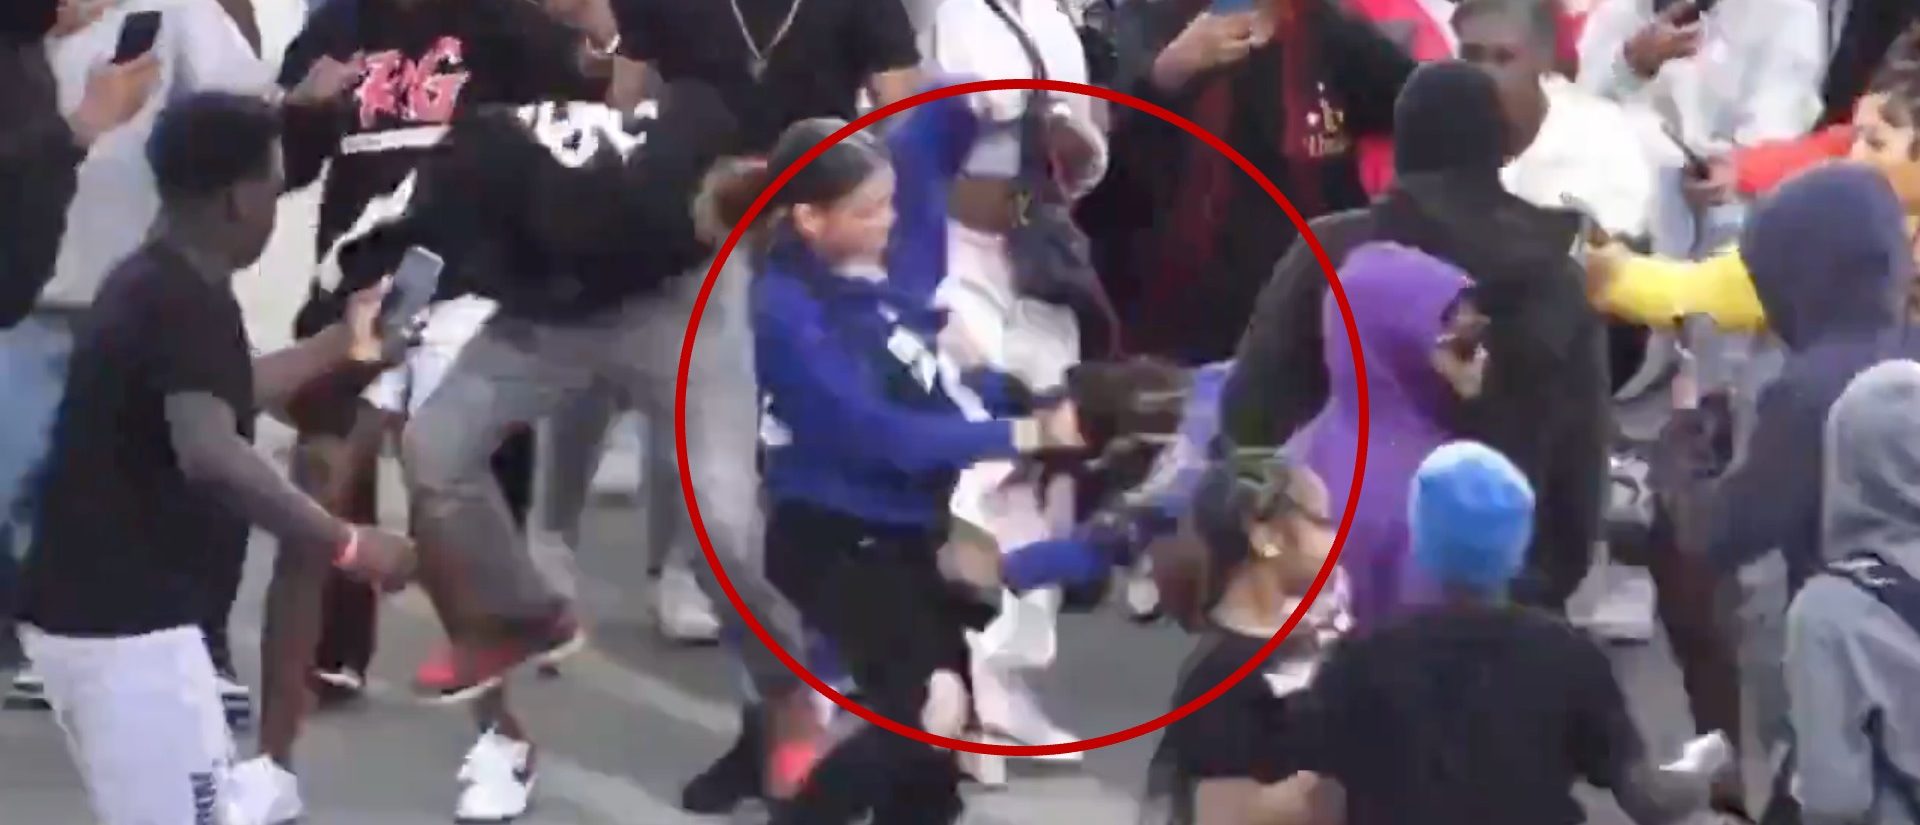 Video Shows Chaotic Brawl Between Two Girls, Mall Forced To Shut Down Early